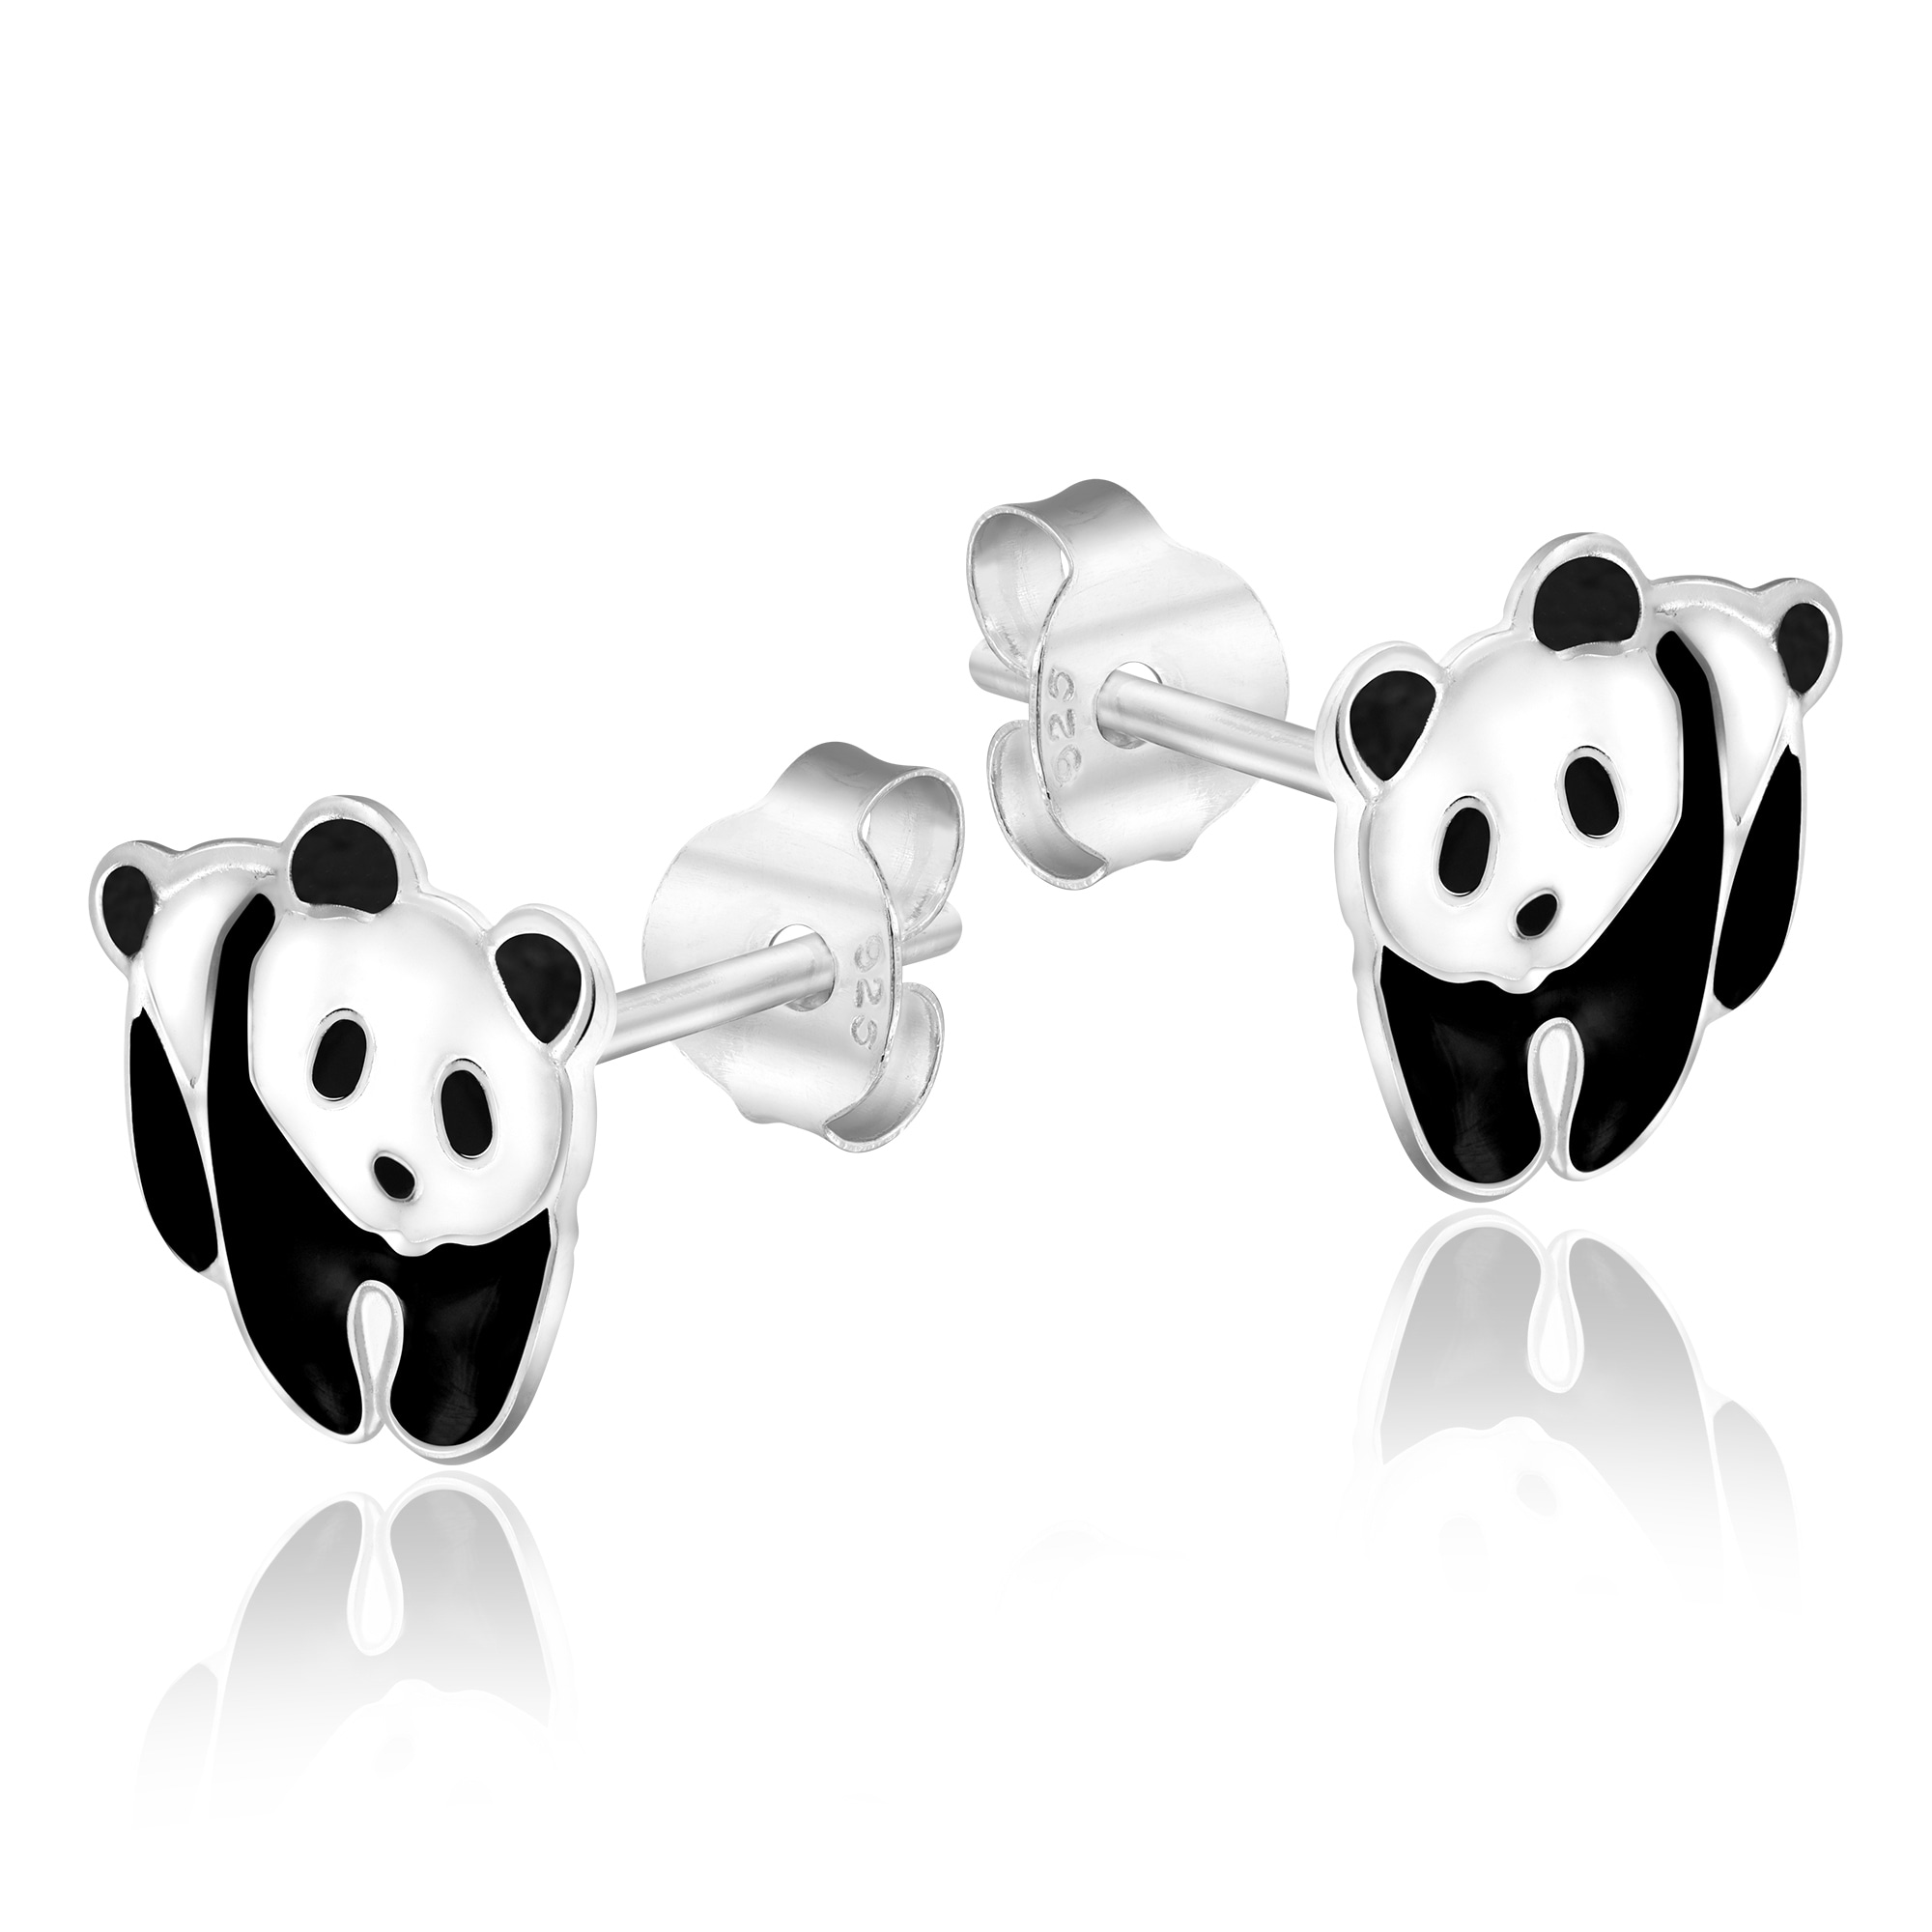 Panda Earrings in 925 Stamped Sterling Silver Lovely Gift Box and Pouch Included